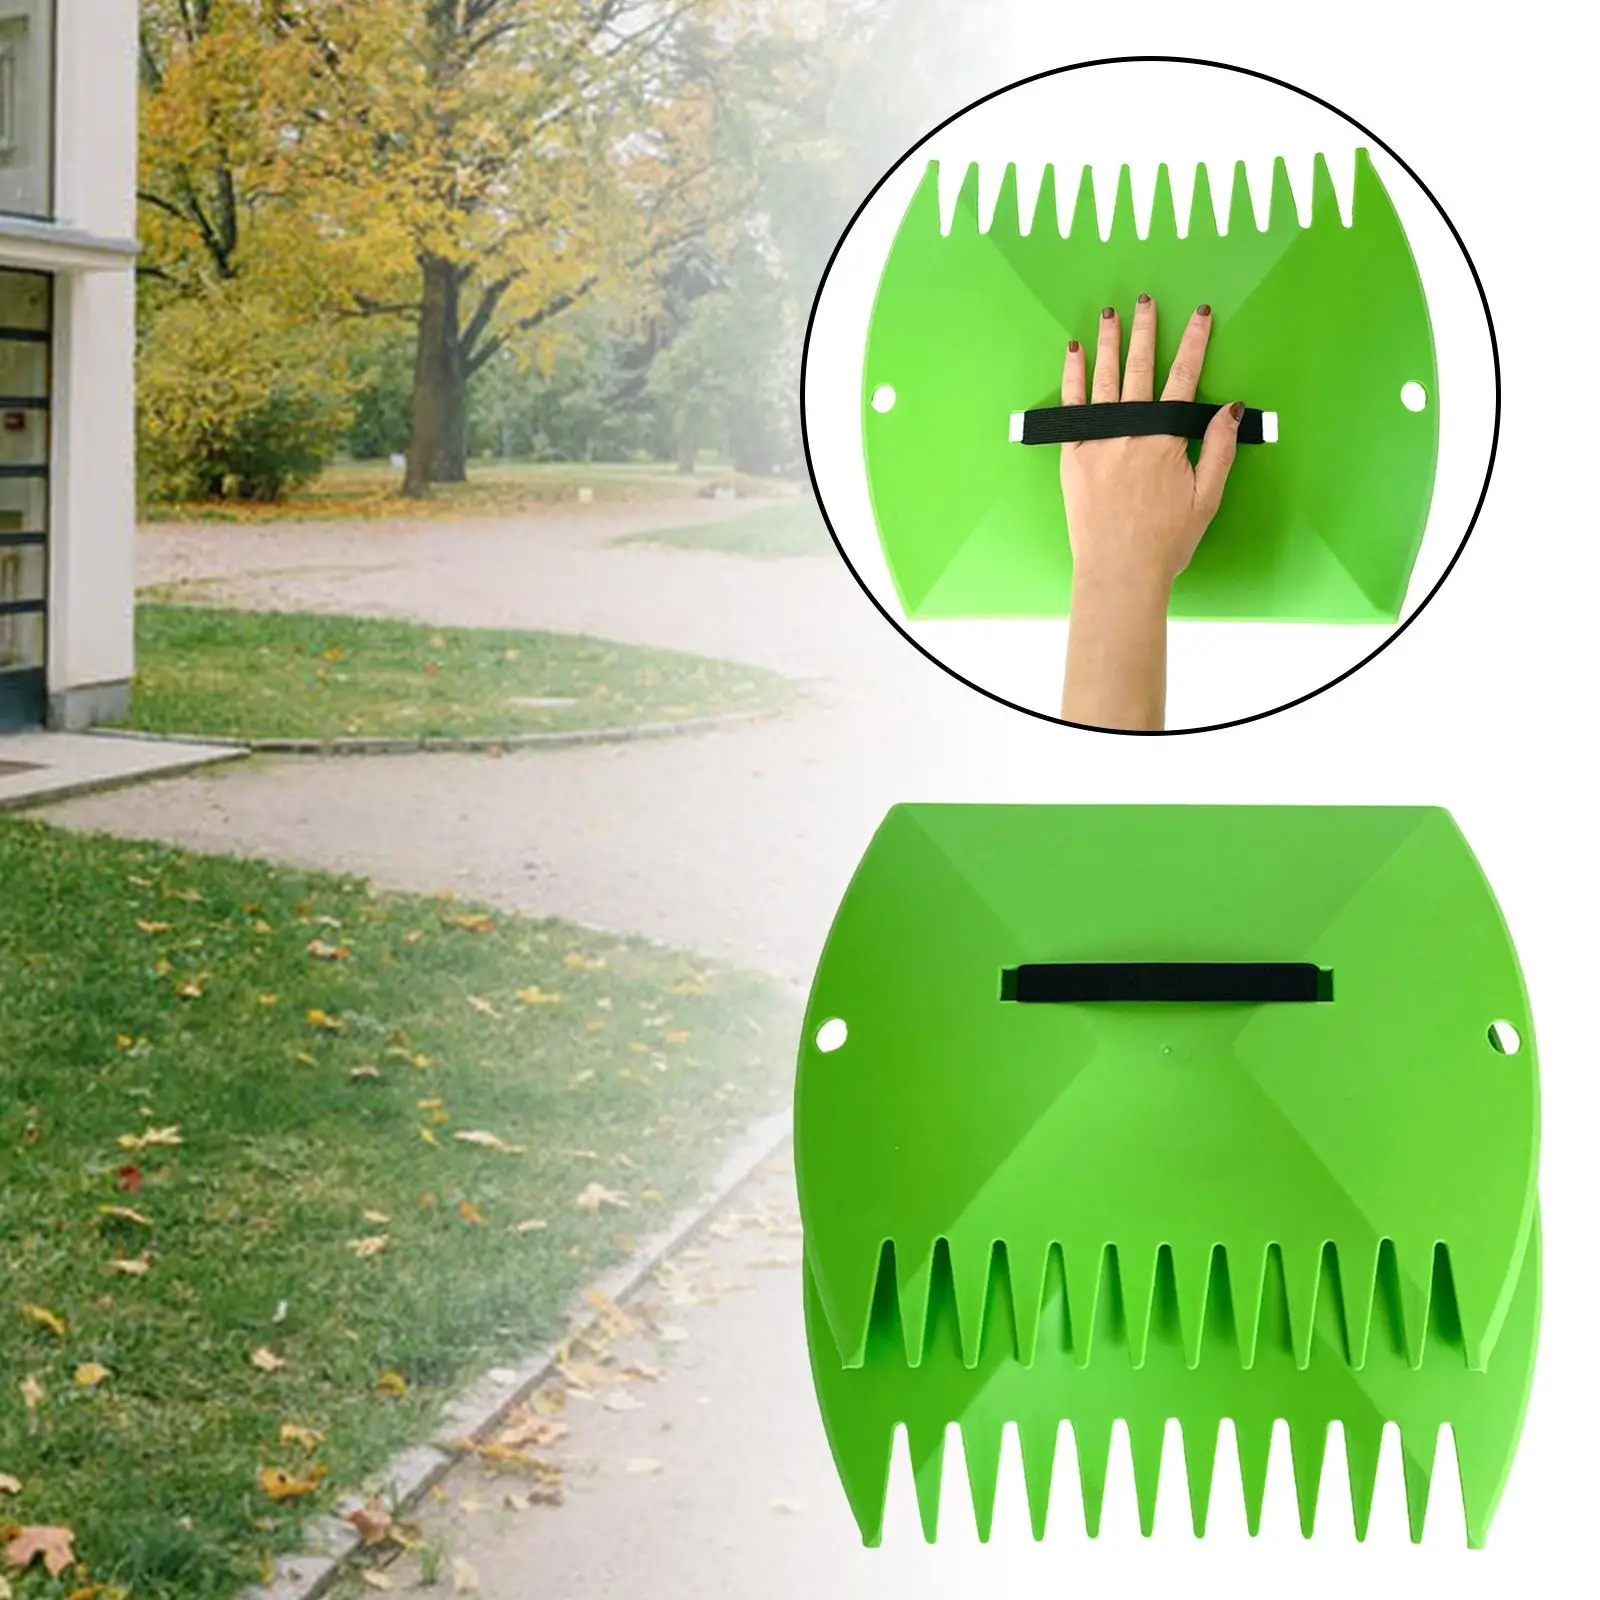 2x Leaves Grabber Portable Multifunctional Leaf Scoops Leaves Collector for Picking up Leaves Cleaning Trash Outdoor Lawn Claw